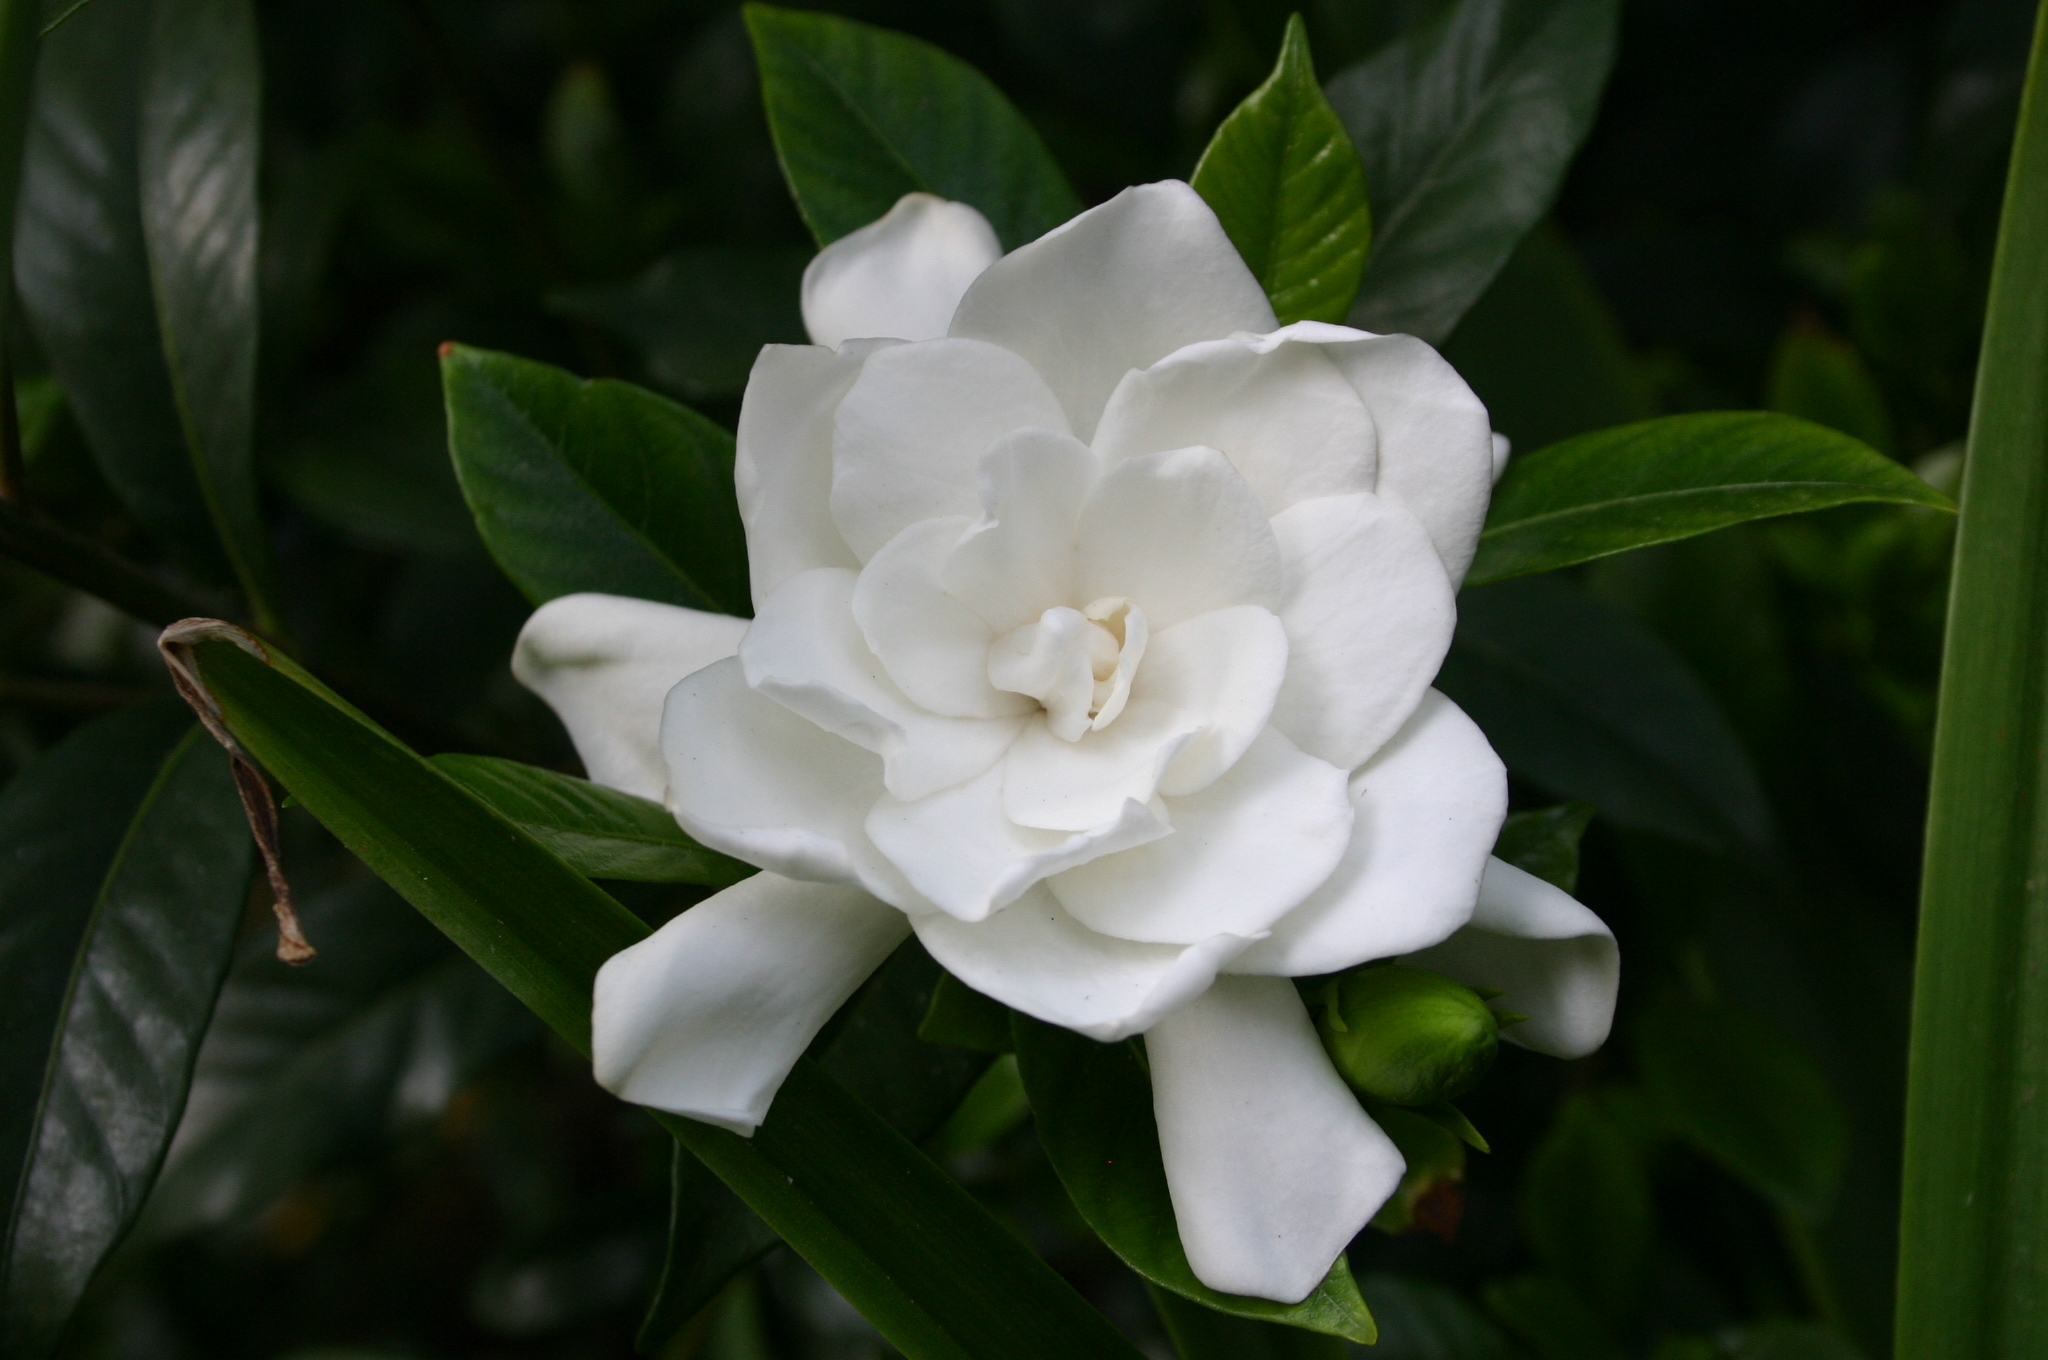 Florist Gardenia Planting Outdoors Walter Reeves The